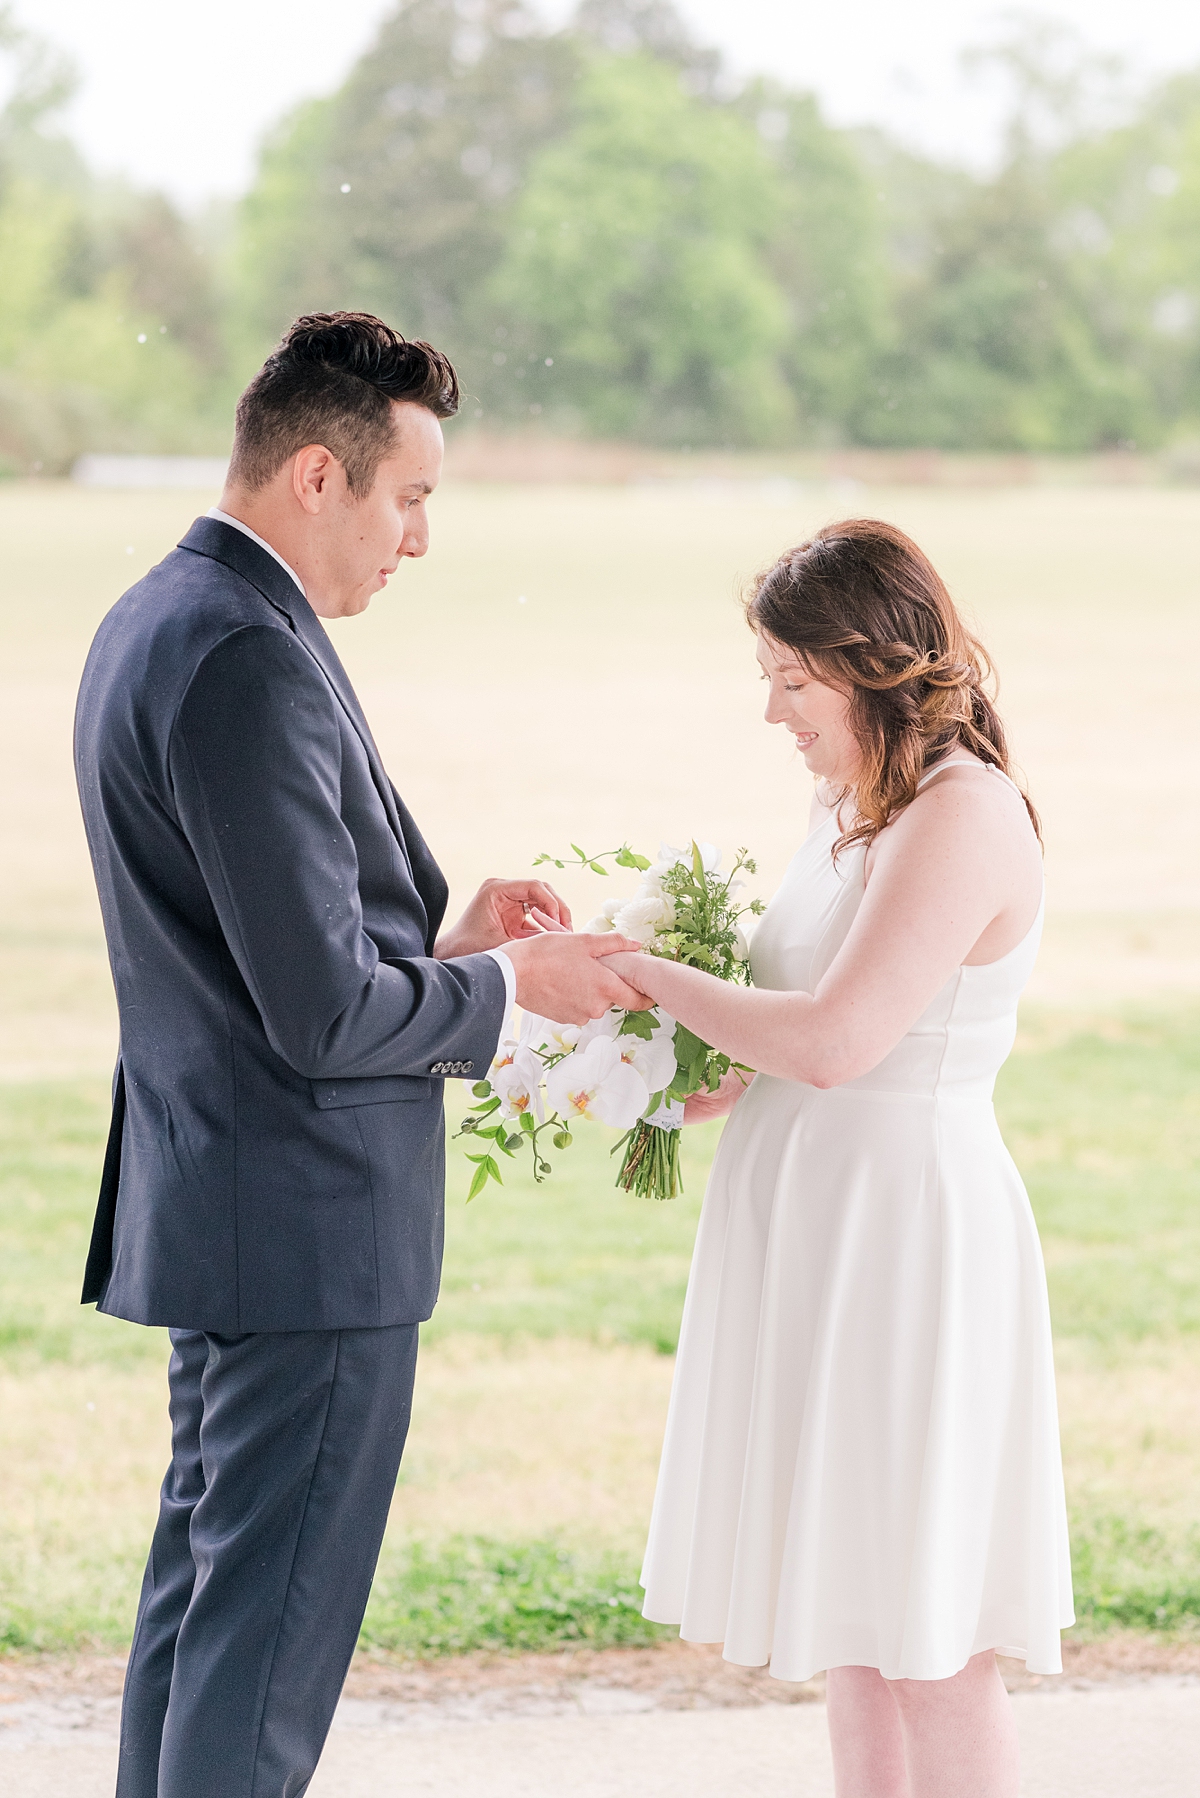 Small Elopement at Hanover Courthouse Park by Richmond Wedding Photographer Kailey Brianne Photography. 